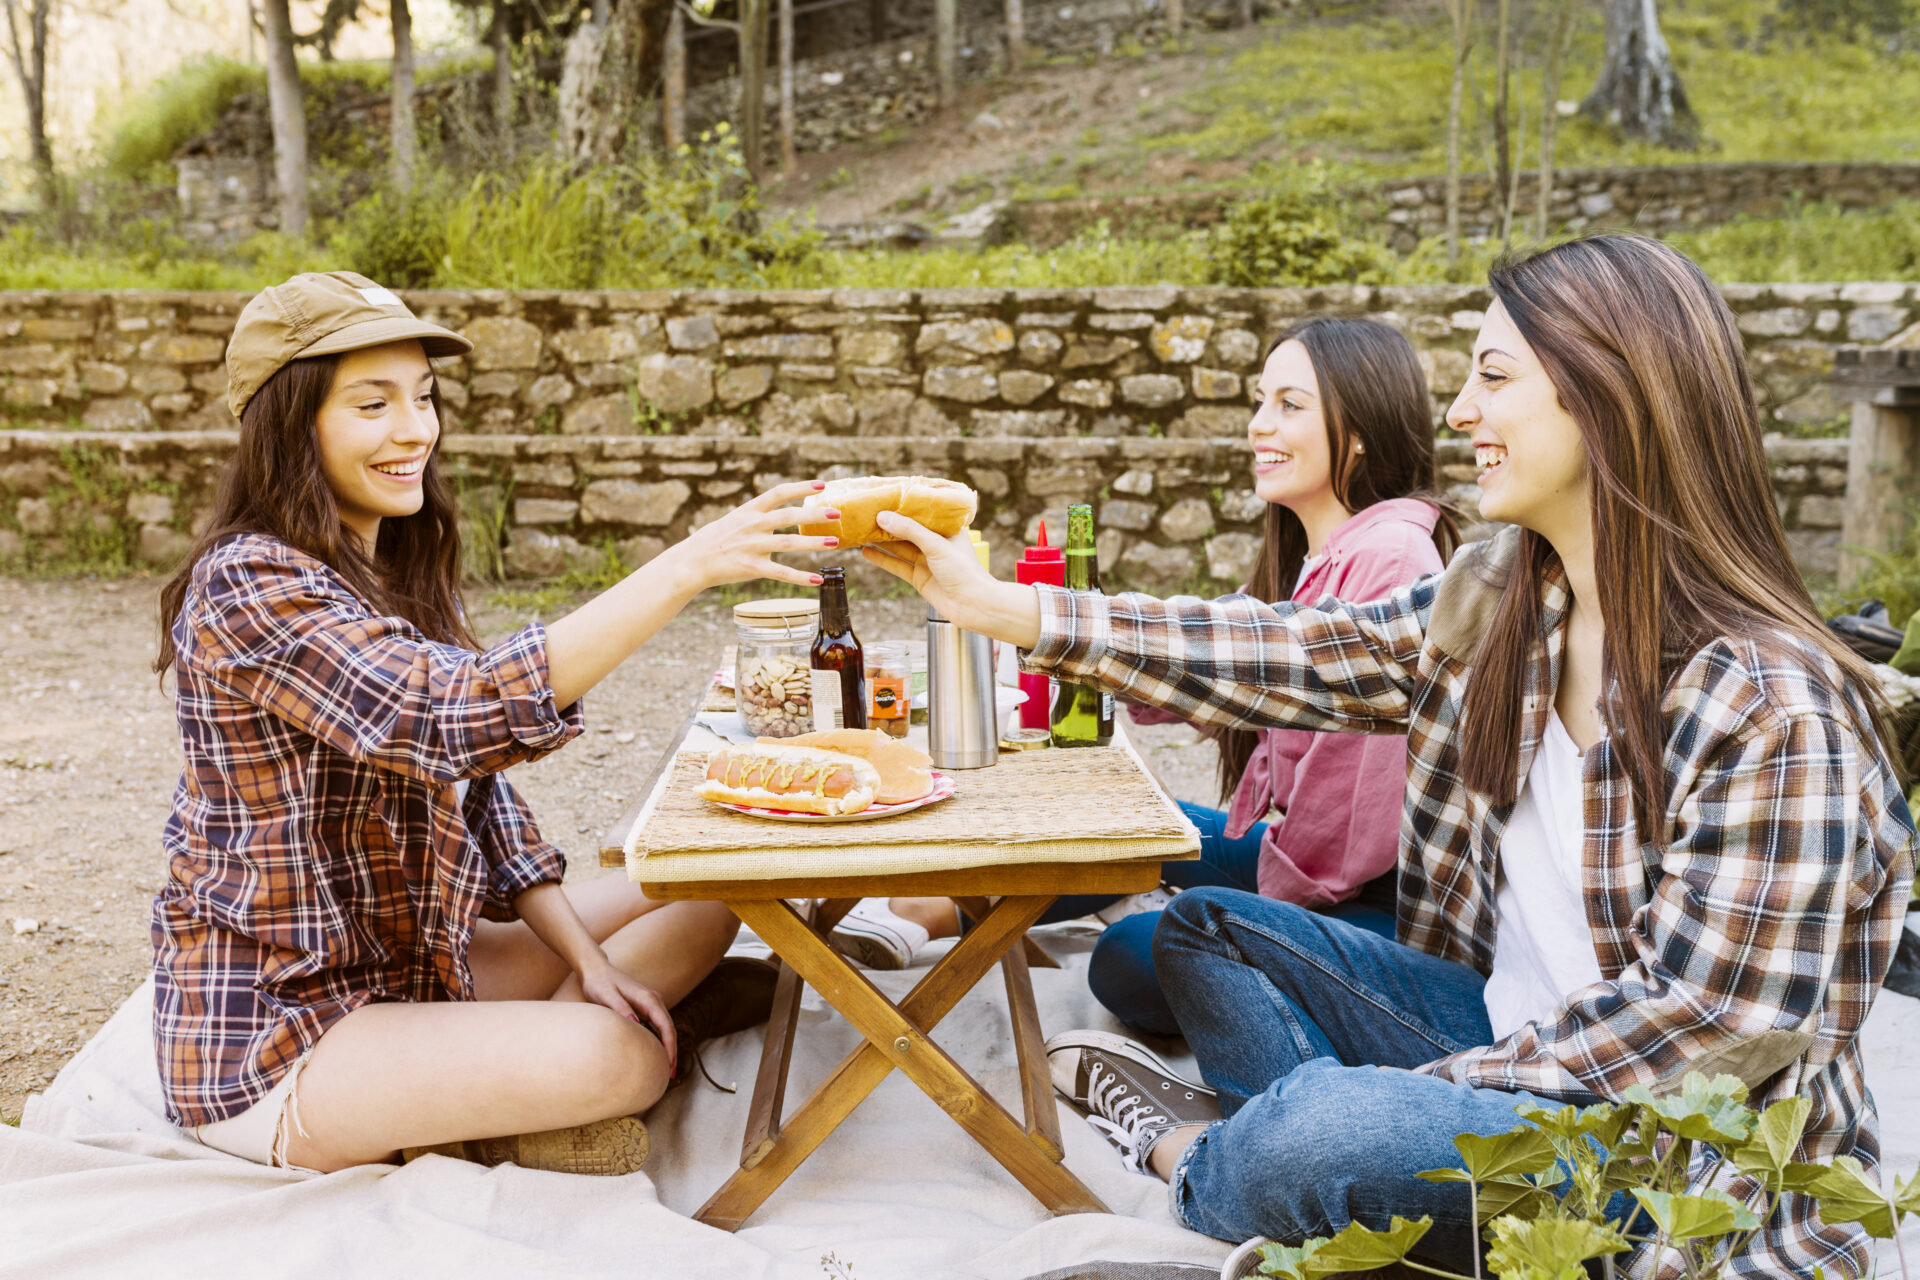 Girls are enjoying lunch on picnic table